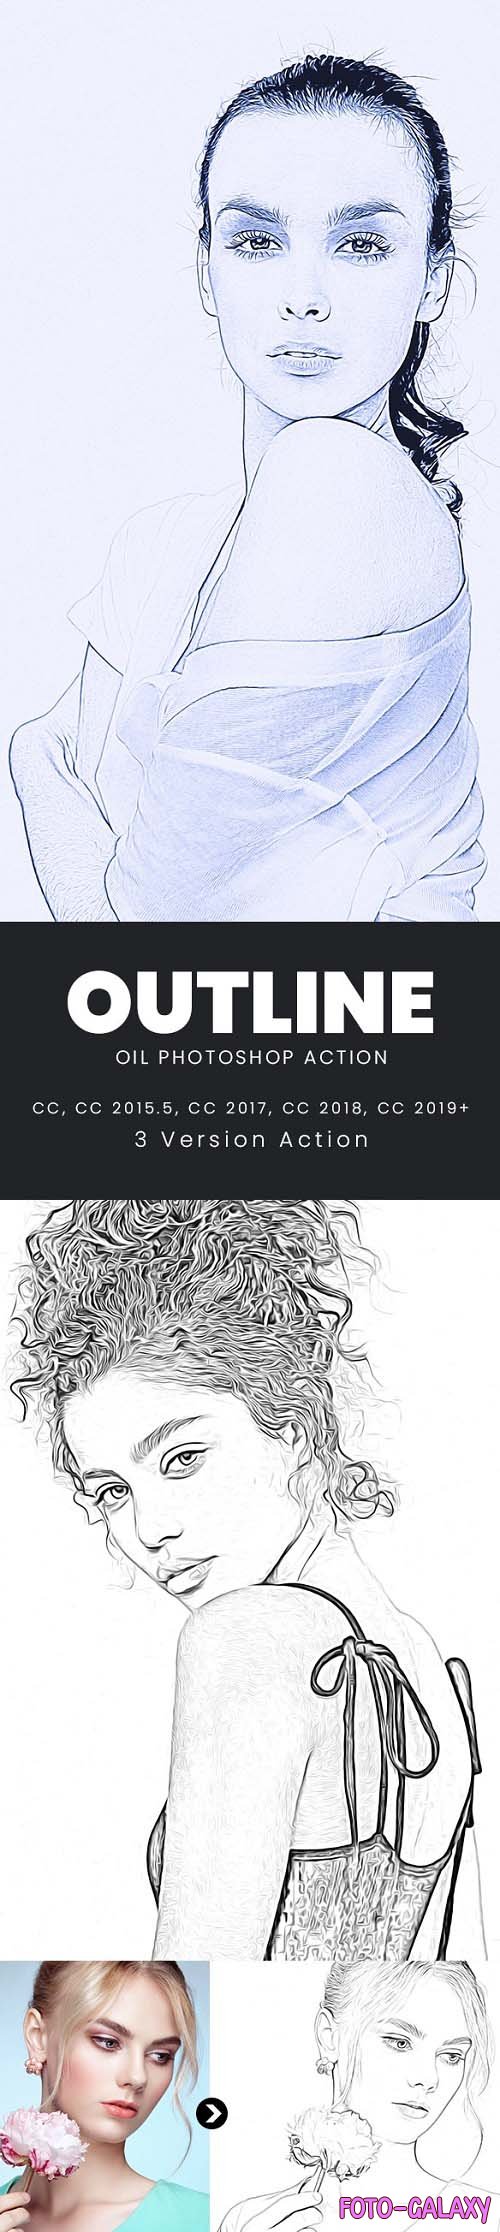 Outline Oil Photoshop Action - 33052588